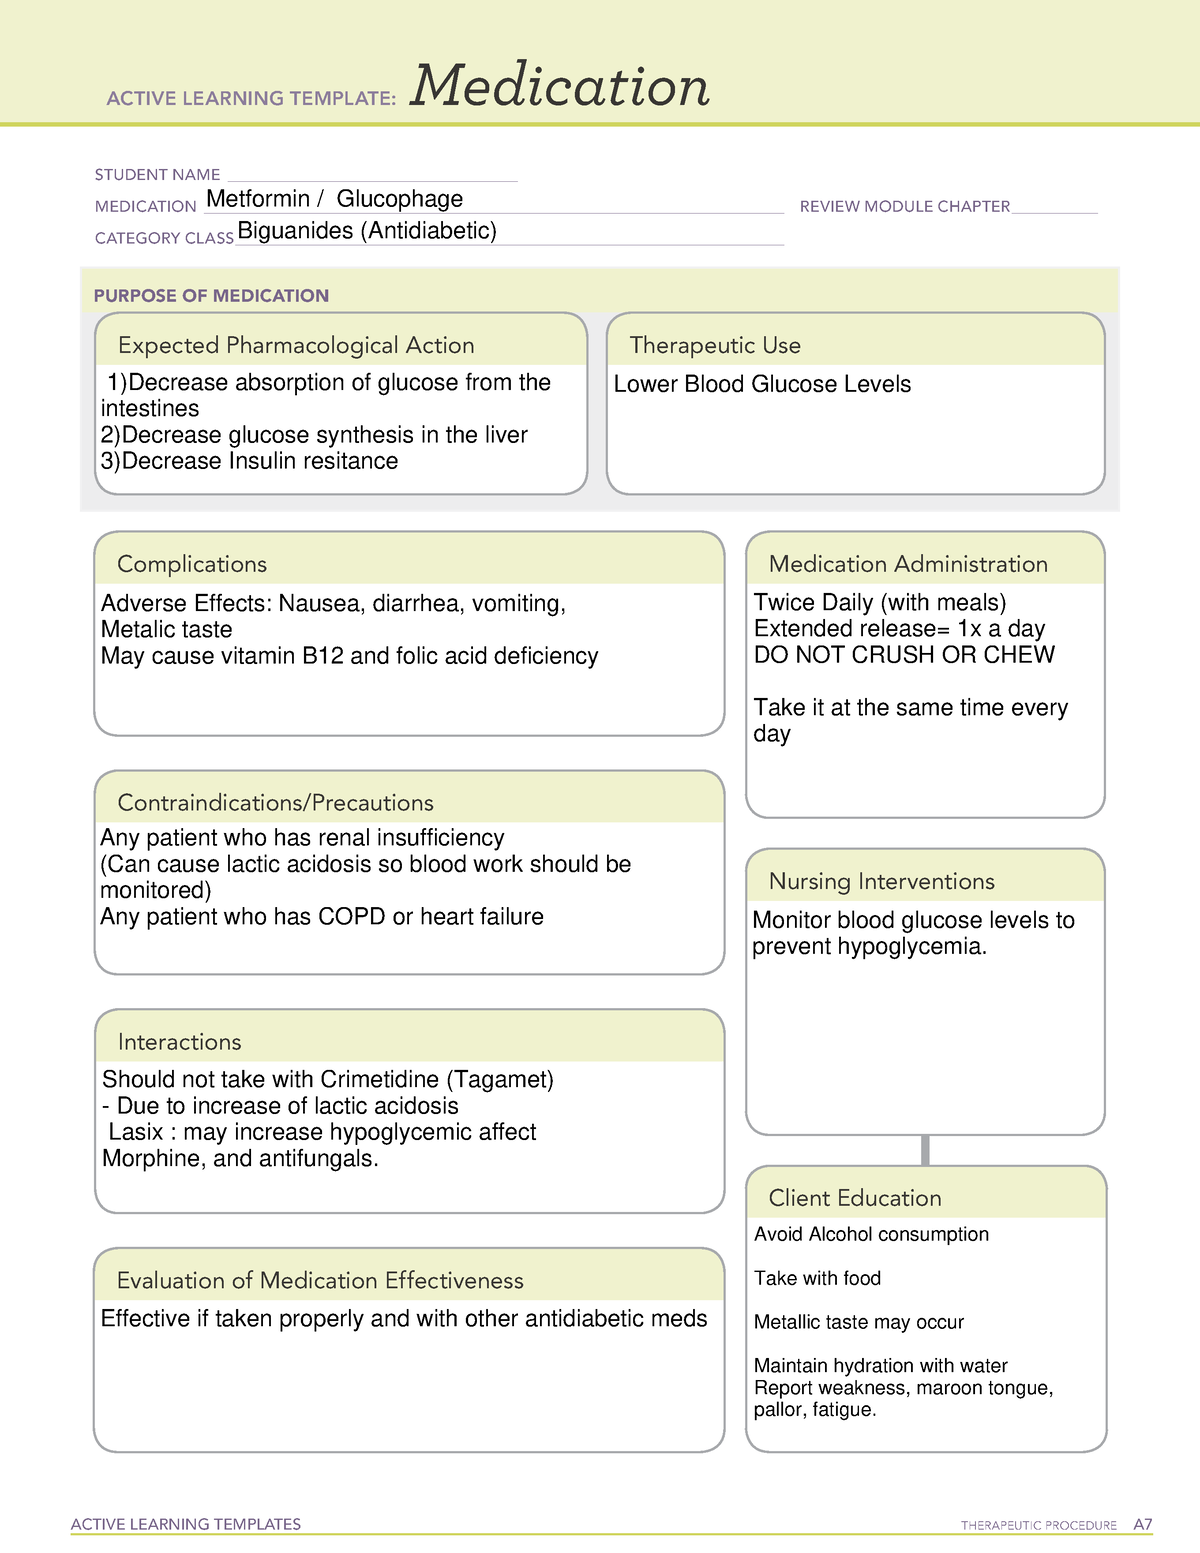 Metformin med card ACTIVE LEARNING TEMPLATES THERAPEUTIC PROCEDURE A